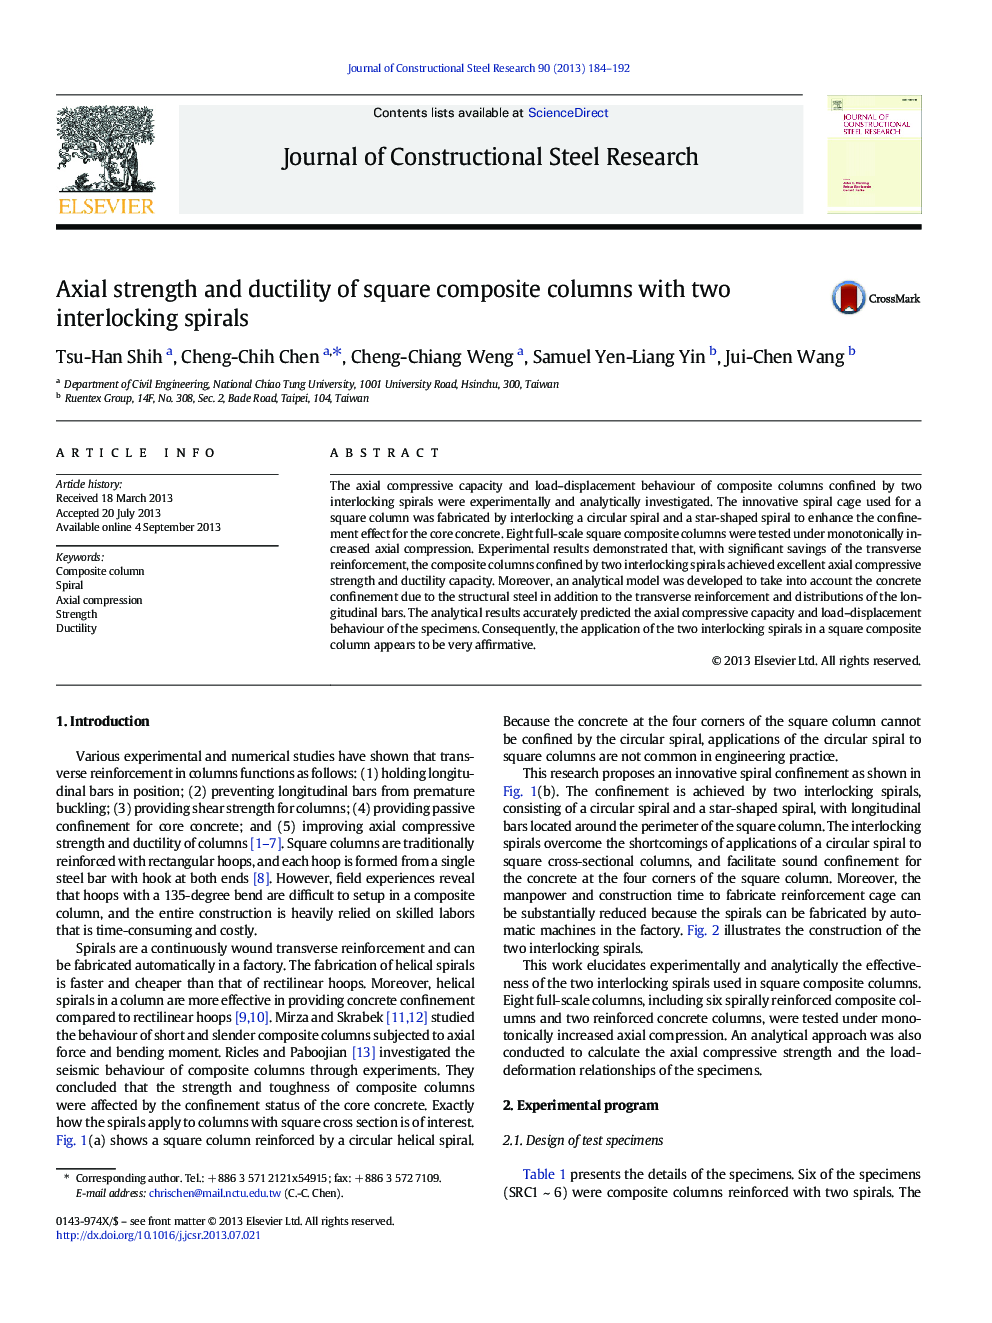 Axial strength and ductility of square composite columns with two interlocking spirals